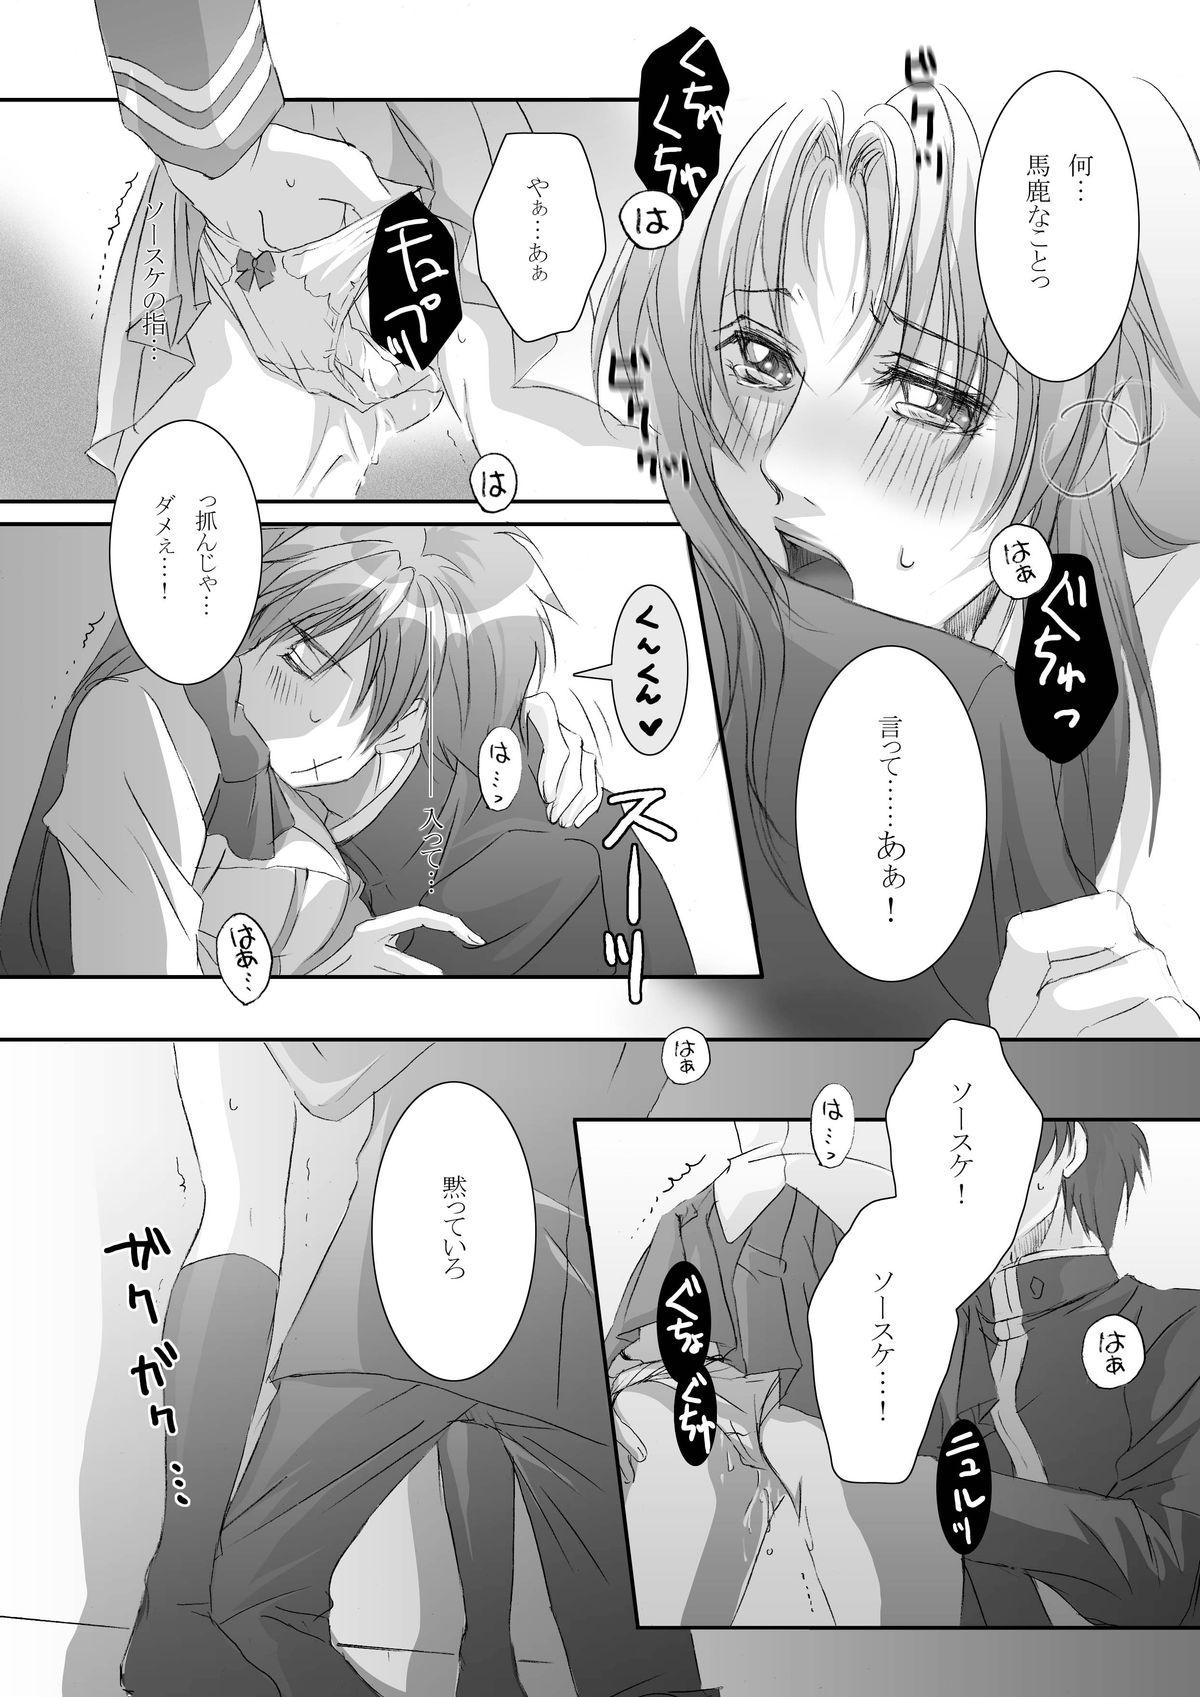 Cock Suck Anjel Seven A7 - Full metal panic Clothed - Page 11